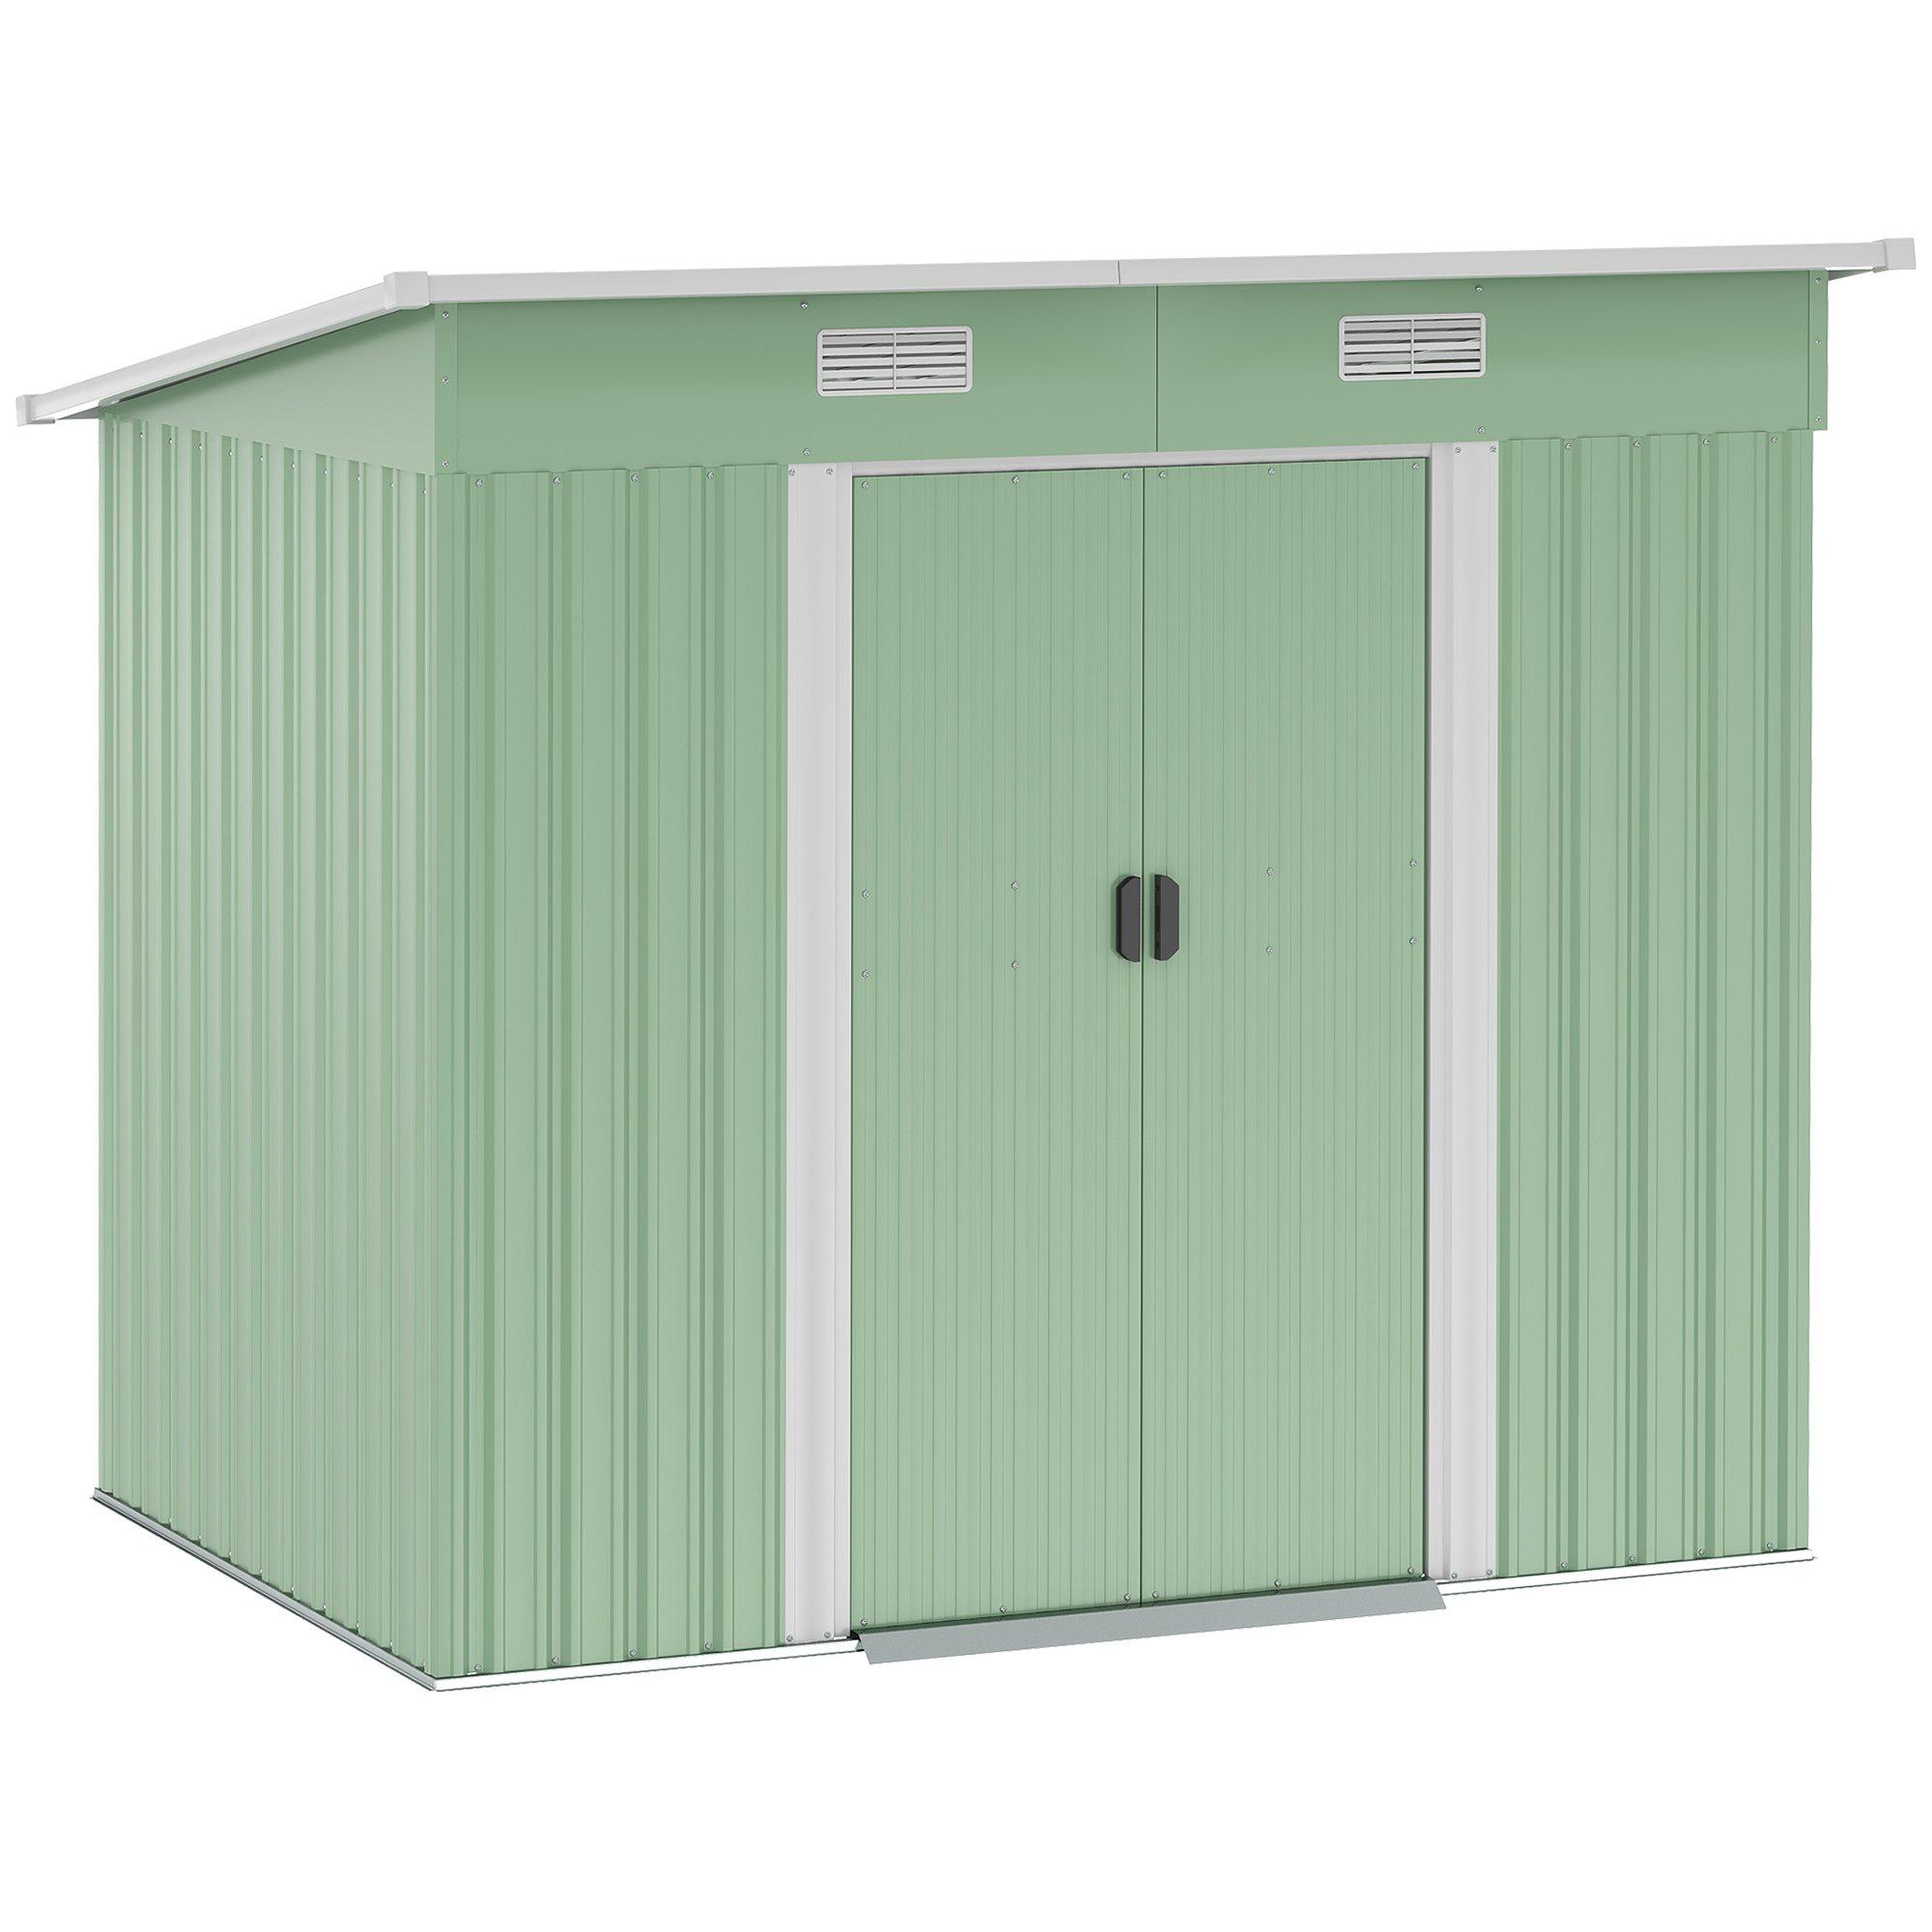 7 x 4ft Outdoor Garden Storage Shed for Backyard Patio